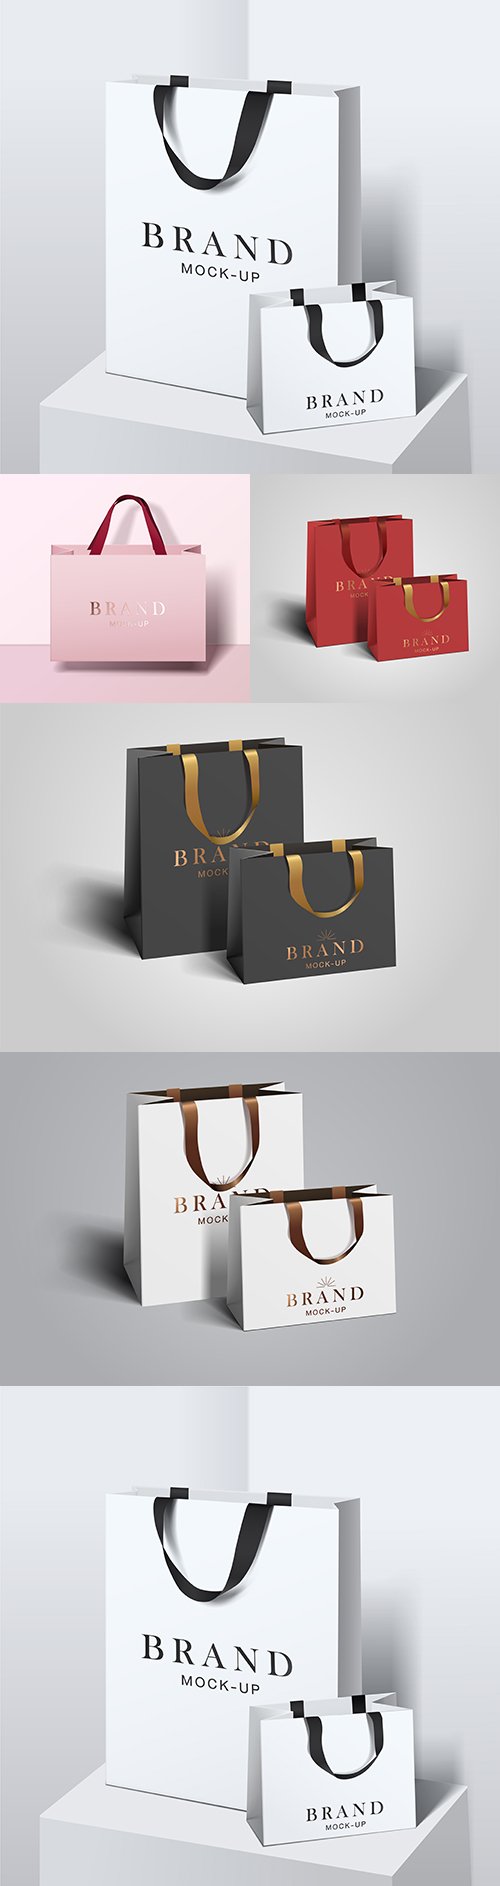 Bag for shopping empty paper bags branded template